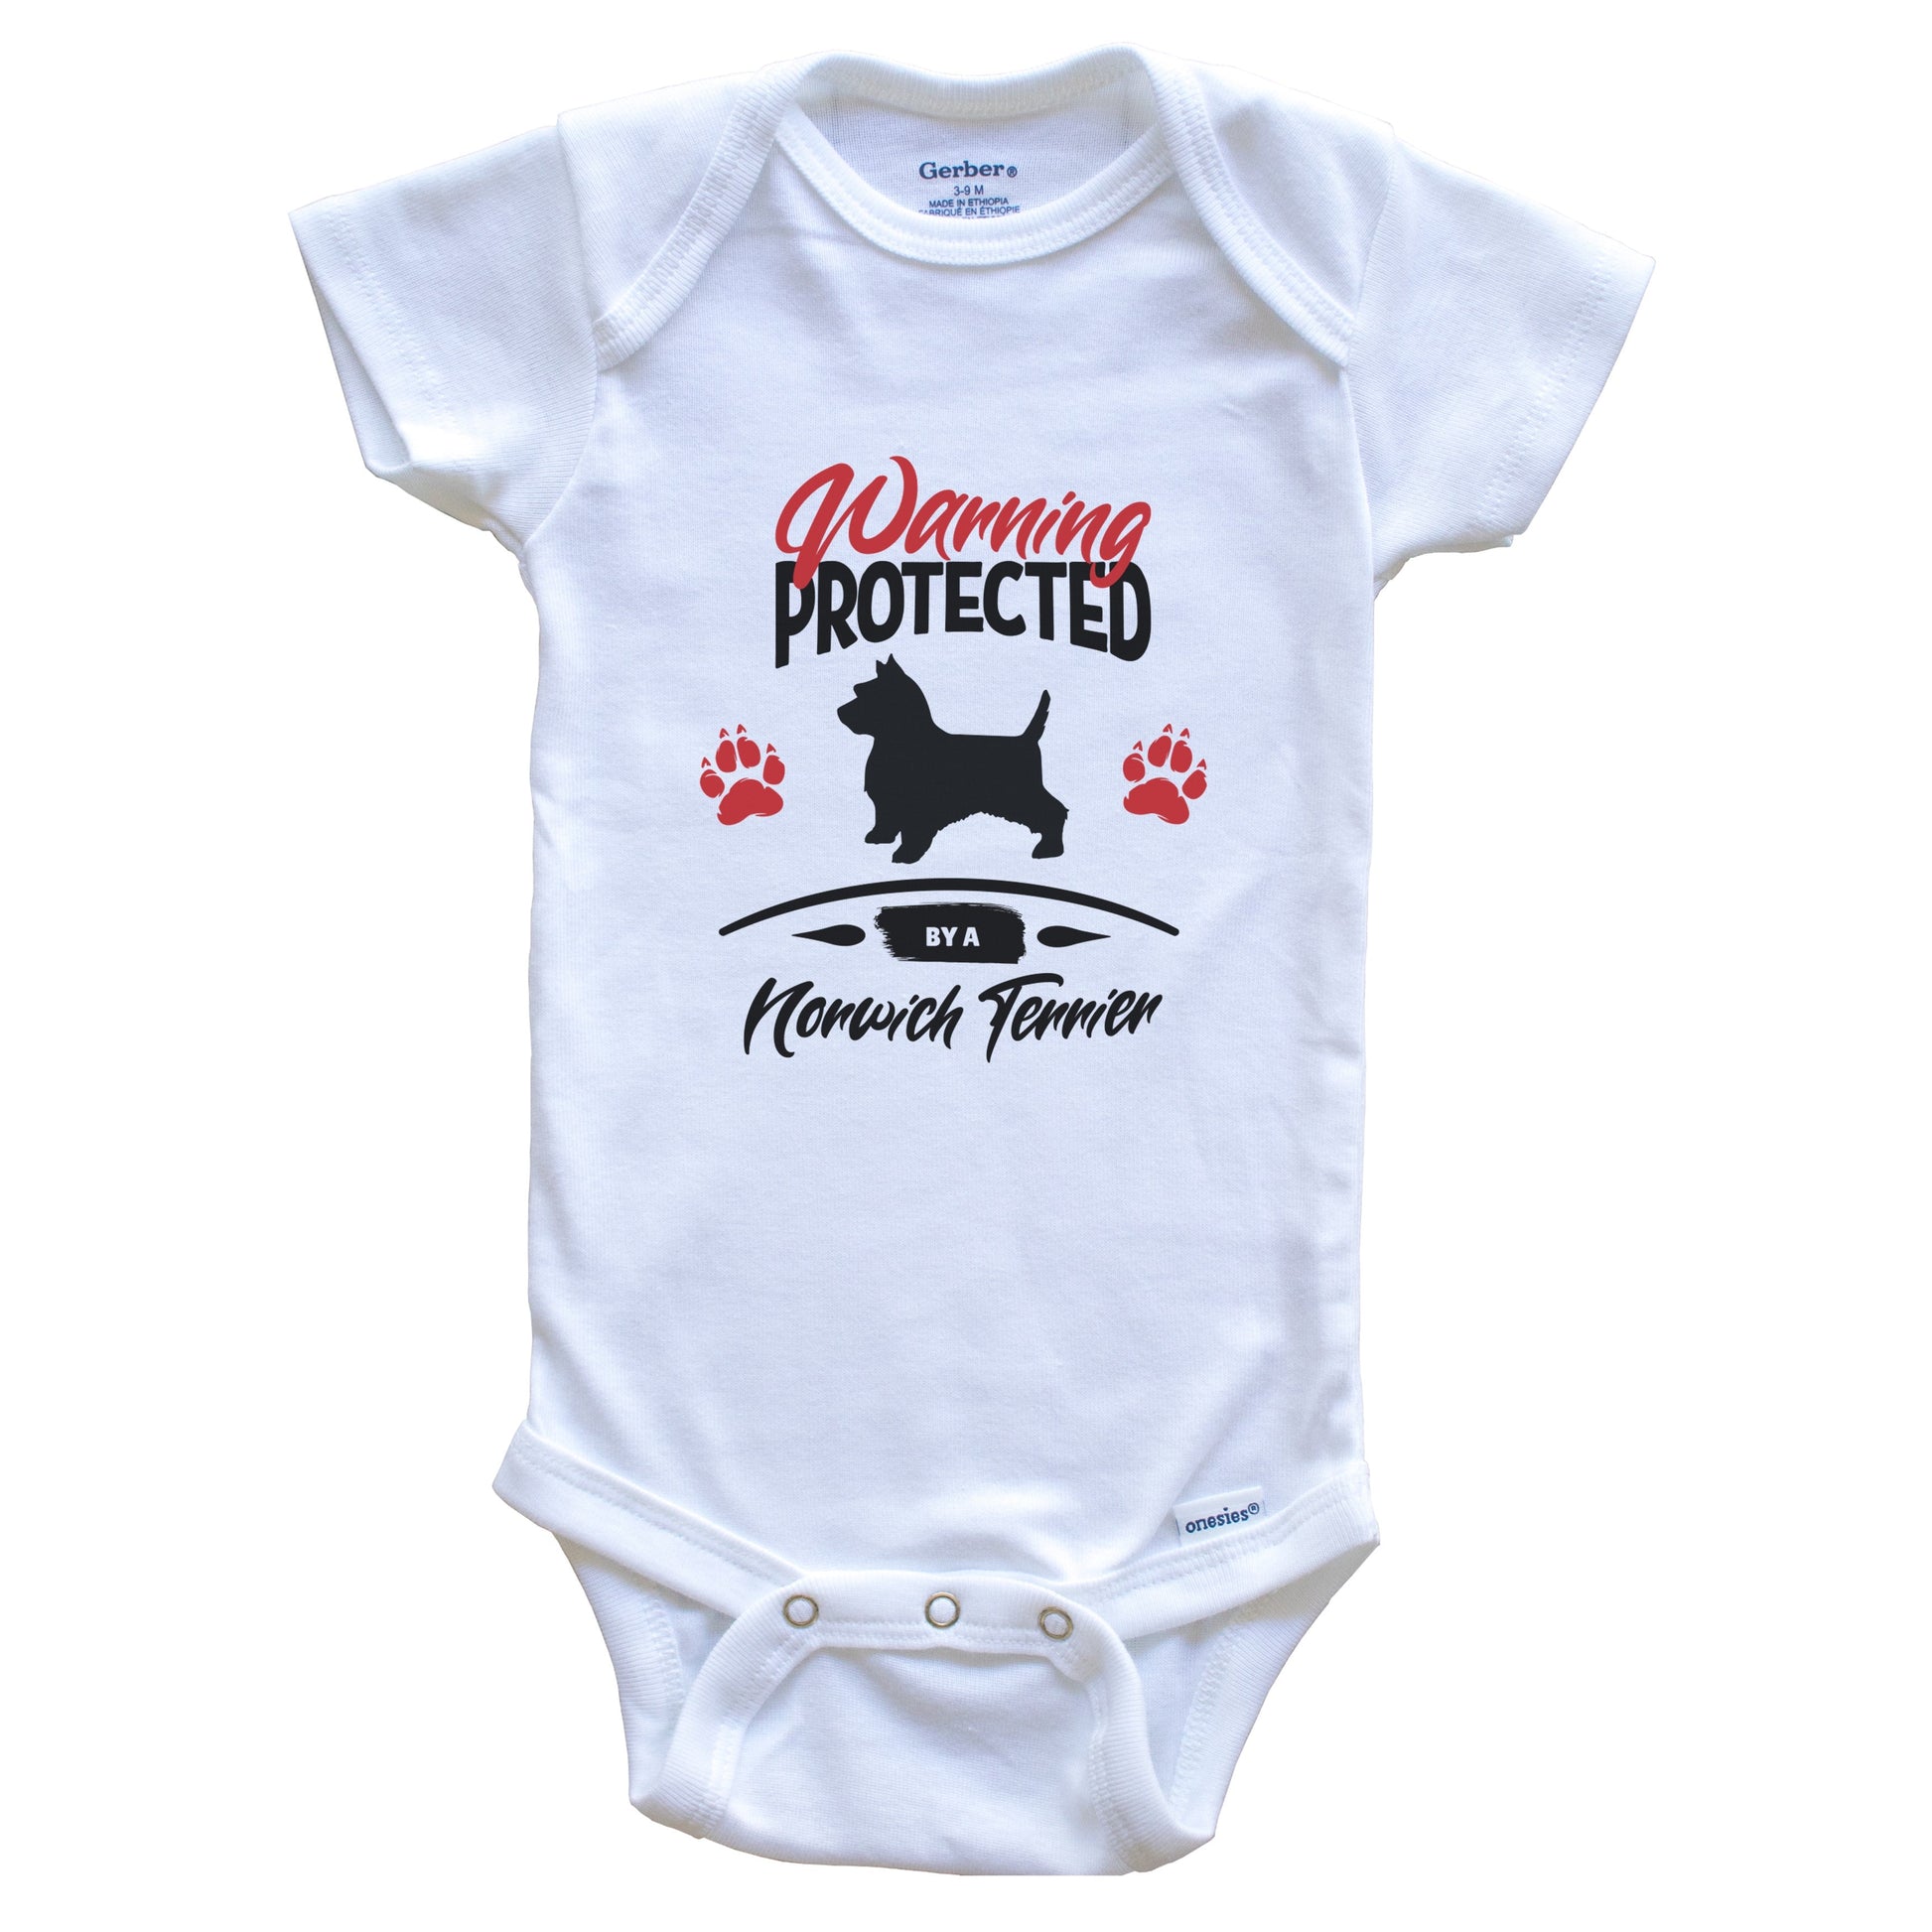 Warning Protected By A Norwich Terrier Funny Dog Owner Baby Bodysuit